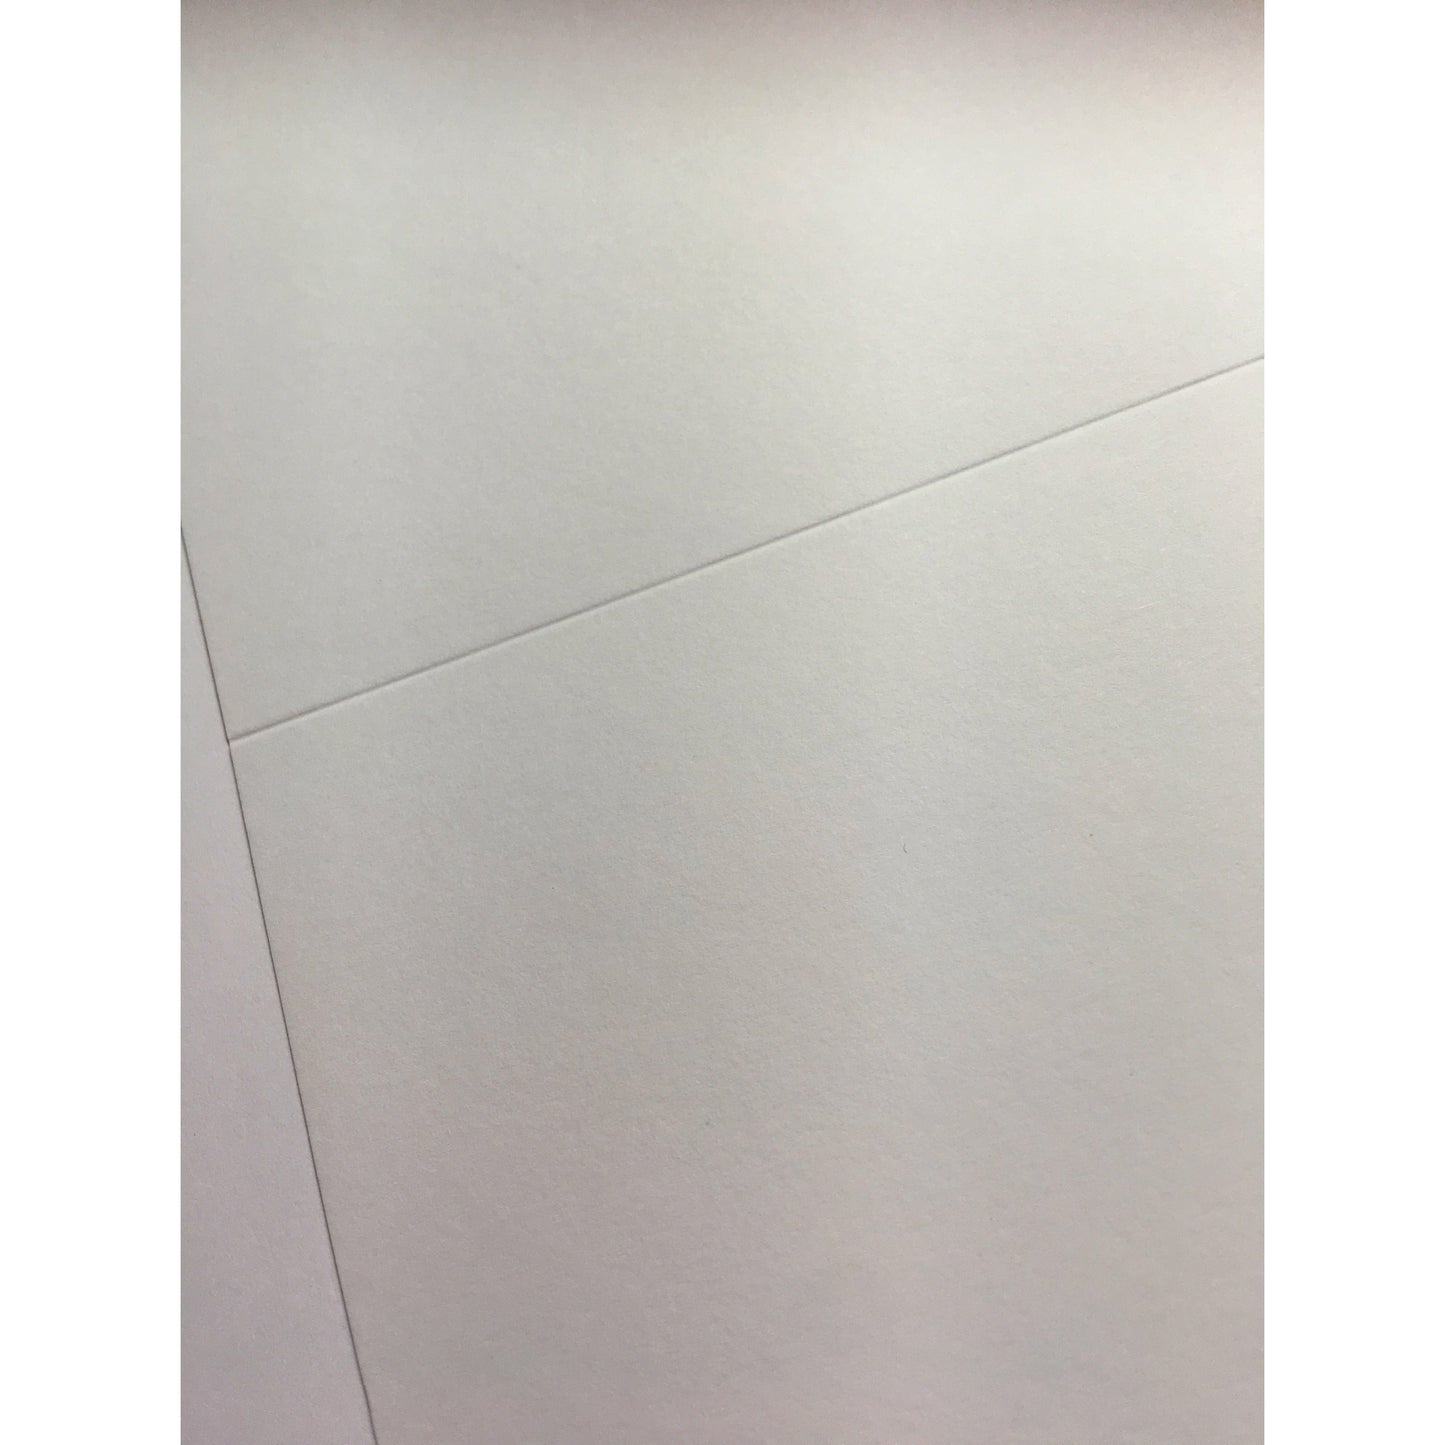 White Smooth Card 250gsm Pack of 20 Sheets choose size